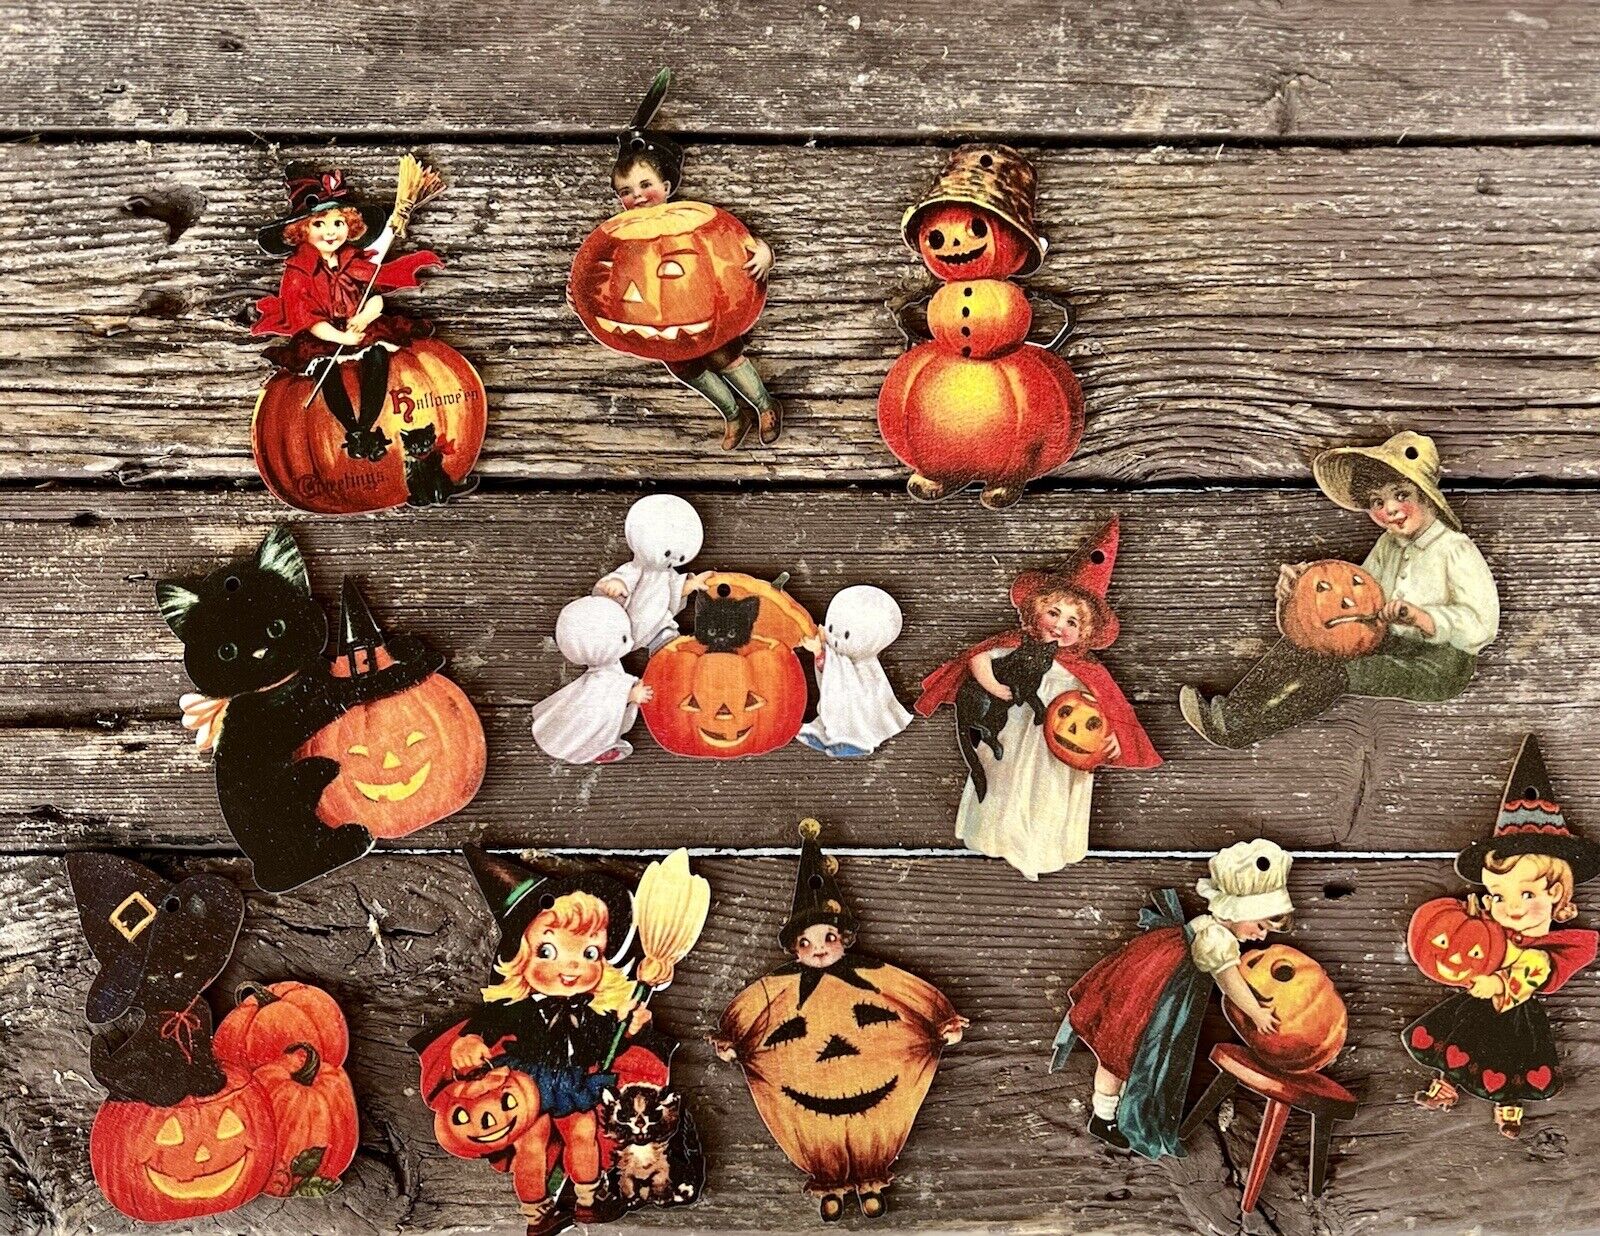 HALLOWEEN Unique “Vintage Style” Wooden Ornaments Set Of 12 Individual Ornaments